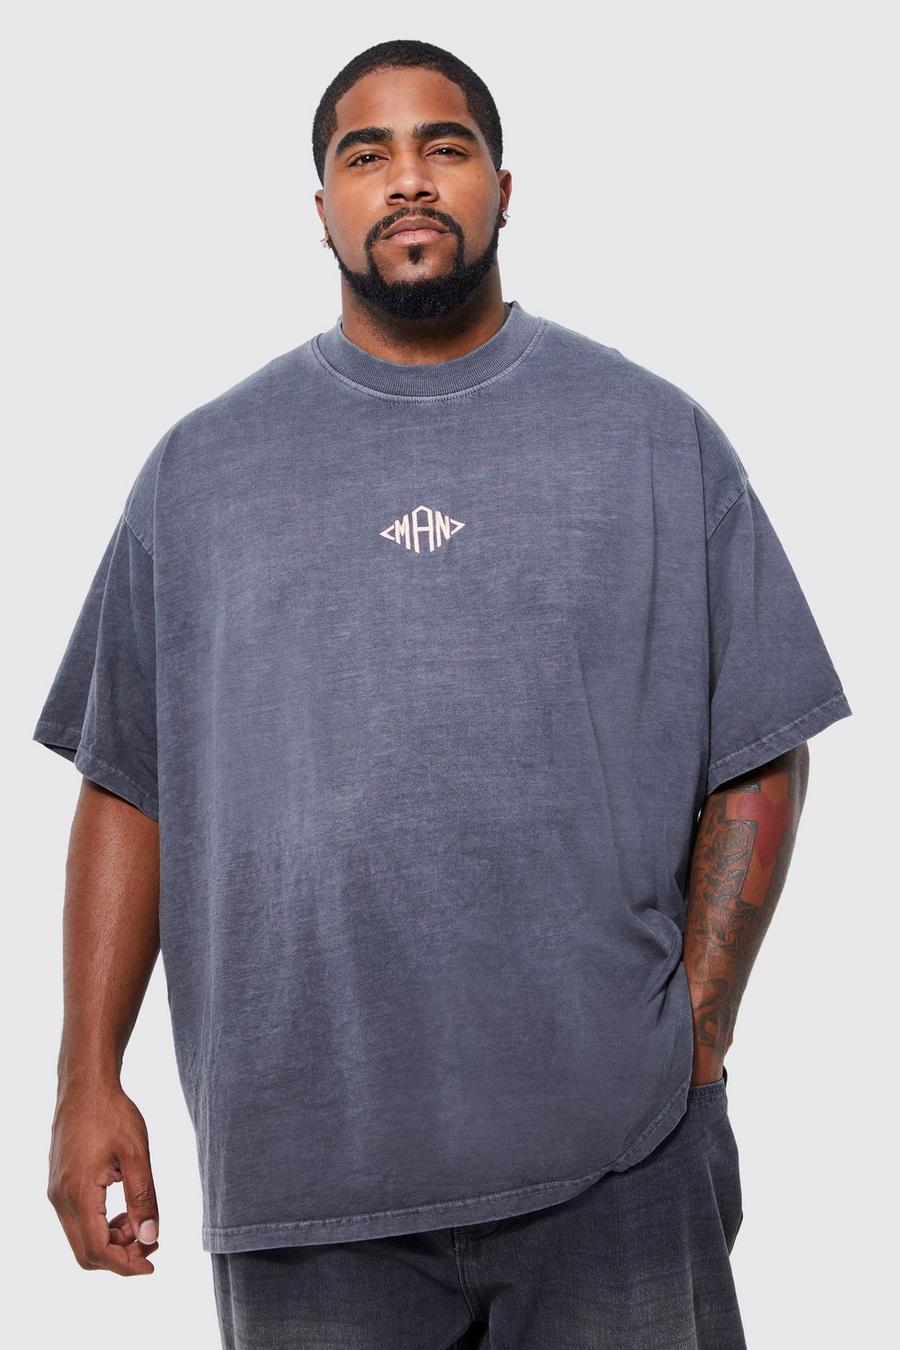 Charcoal gris Plus Man Oversized Heavyweight Washed T-shirt